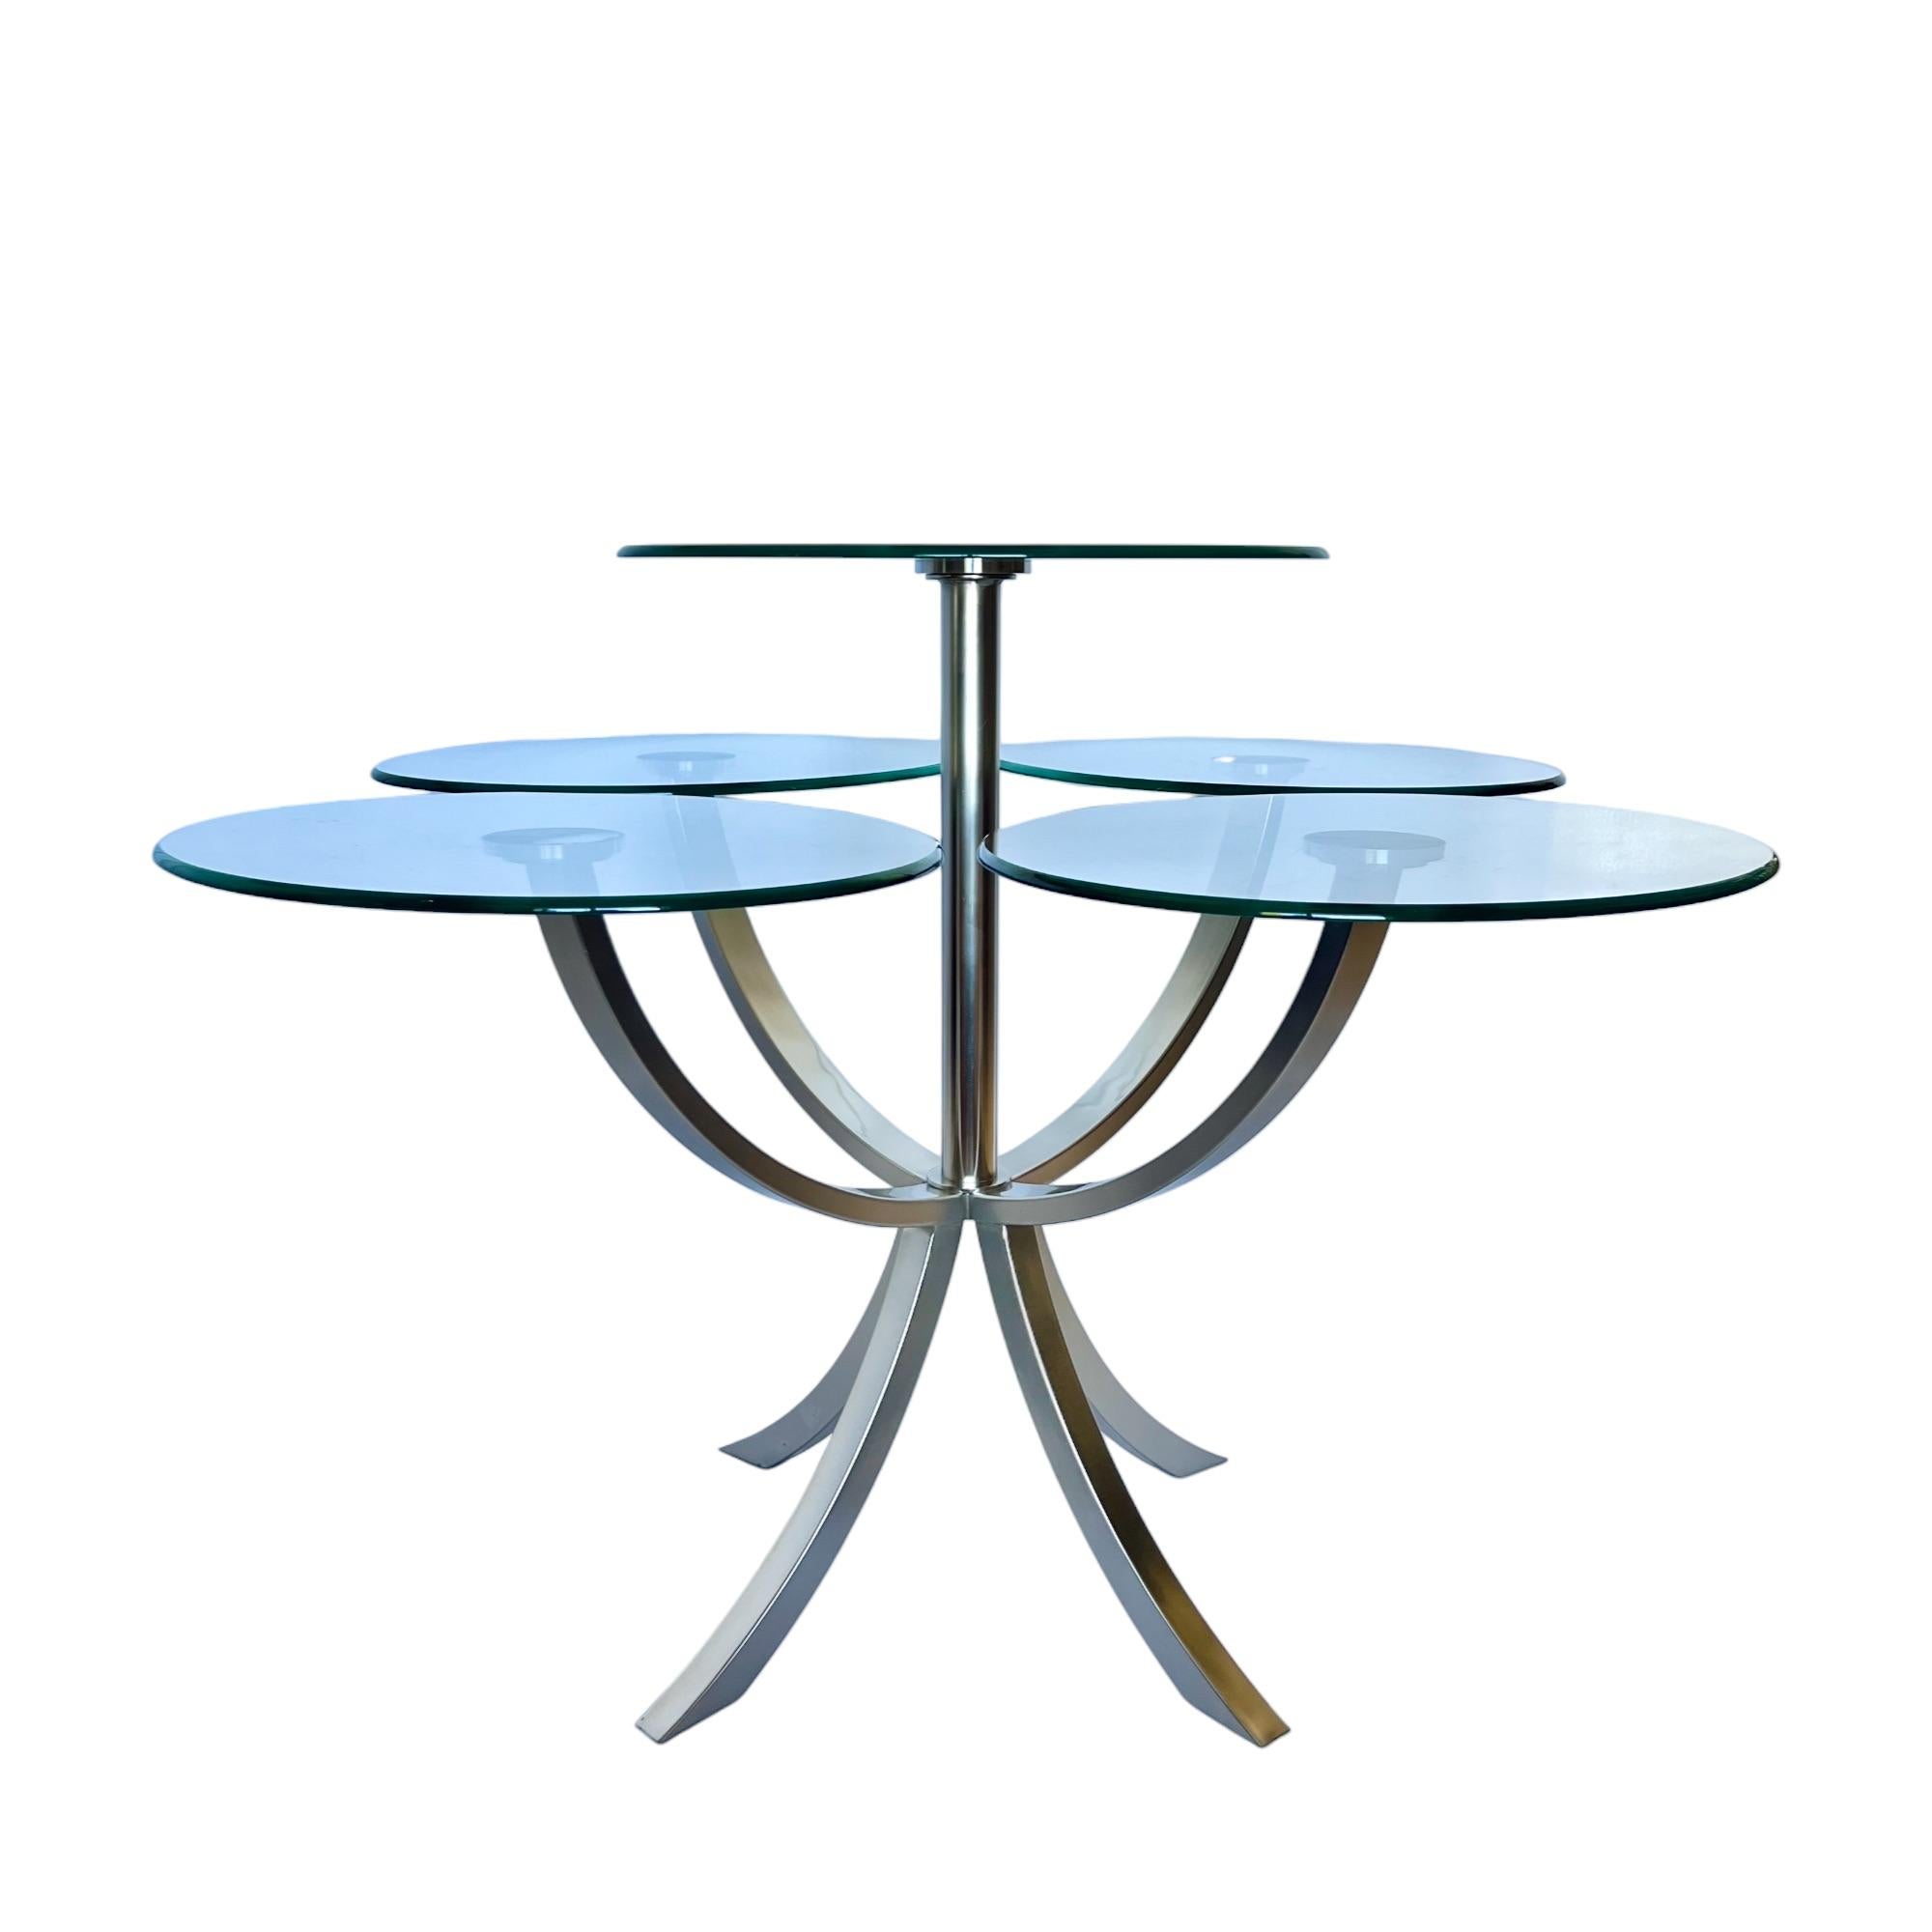 A 'Circle of Life' dining table by the Design Institute of America - DIA, circa 1980. The unique postmodern design showcases four individual table height oval glass dining surfaces surrounding one taller circular center surface. The glass discs are